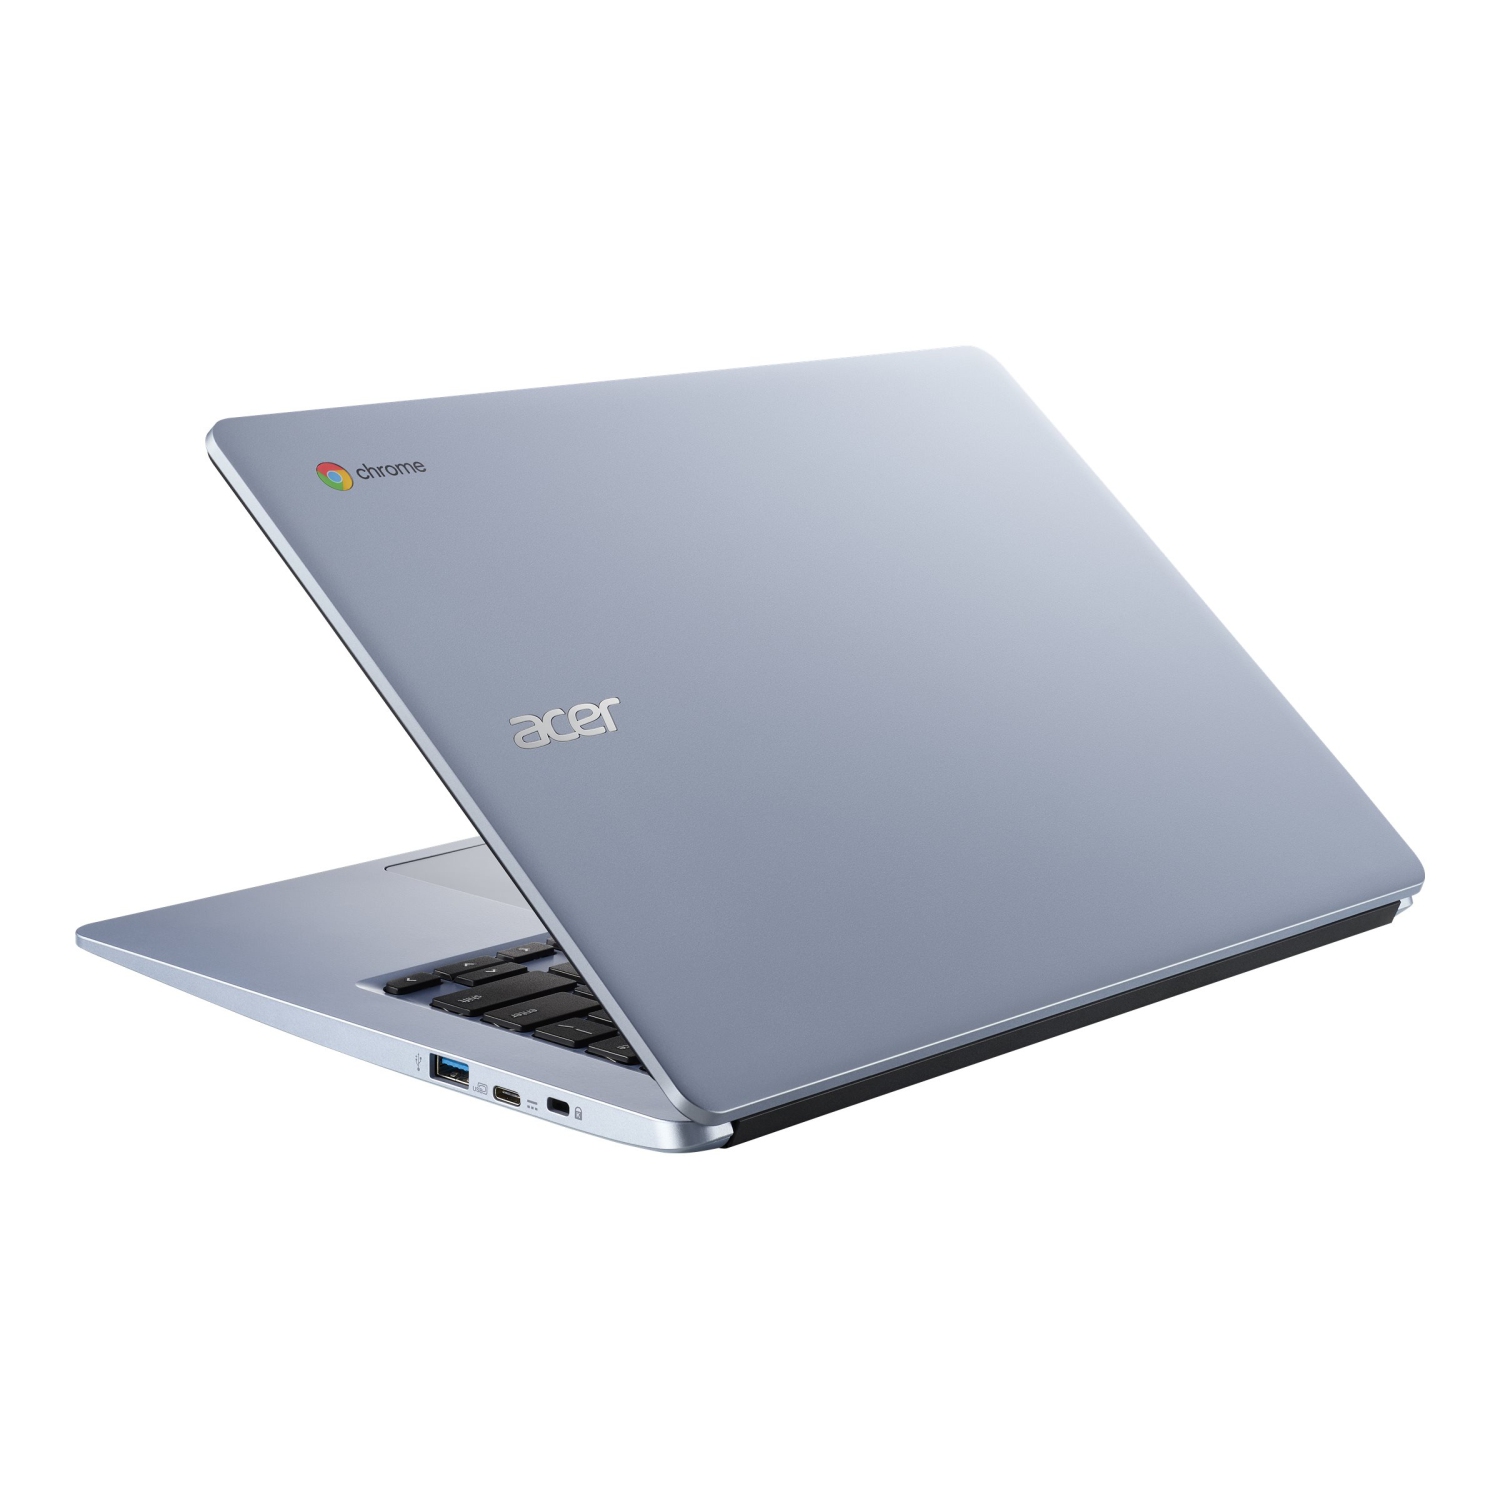 Refurbished (Excellent) - Acer 14" Touch Screen Chromebook (Intel N4020/4Gb/64Gb eMMC/Google Chrome) - Manufacturer ReCertified w/ 1 Year Warranty